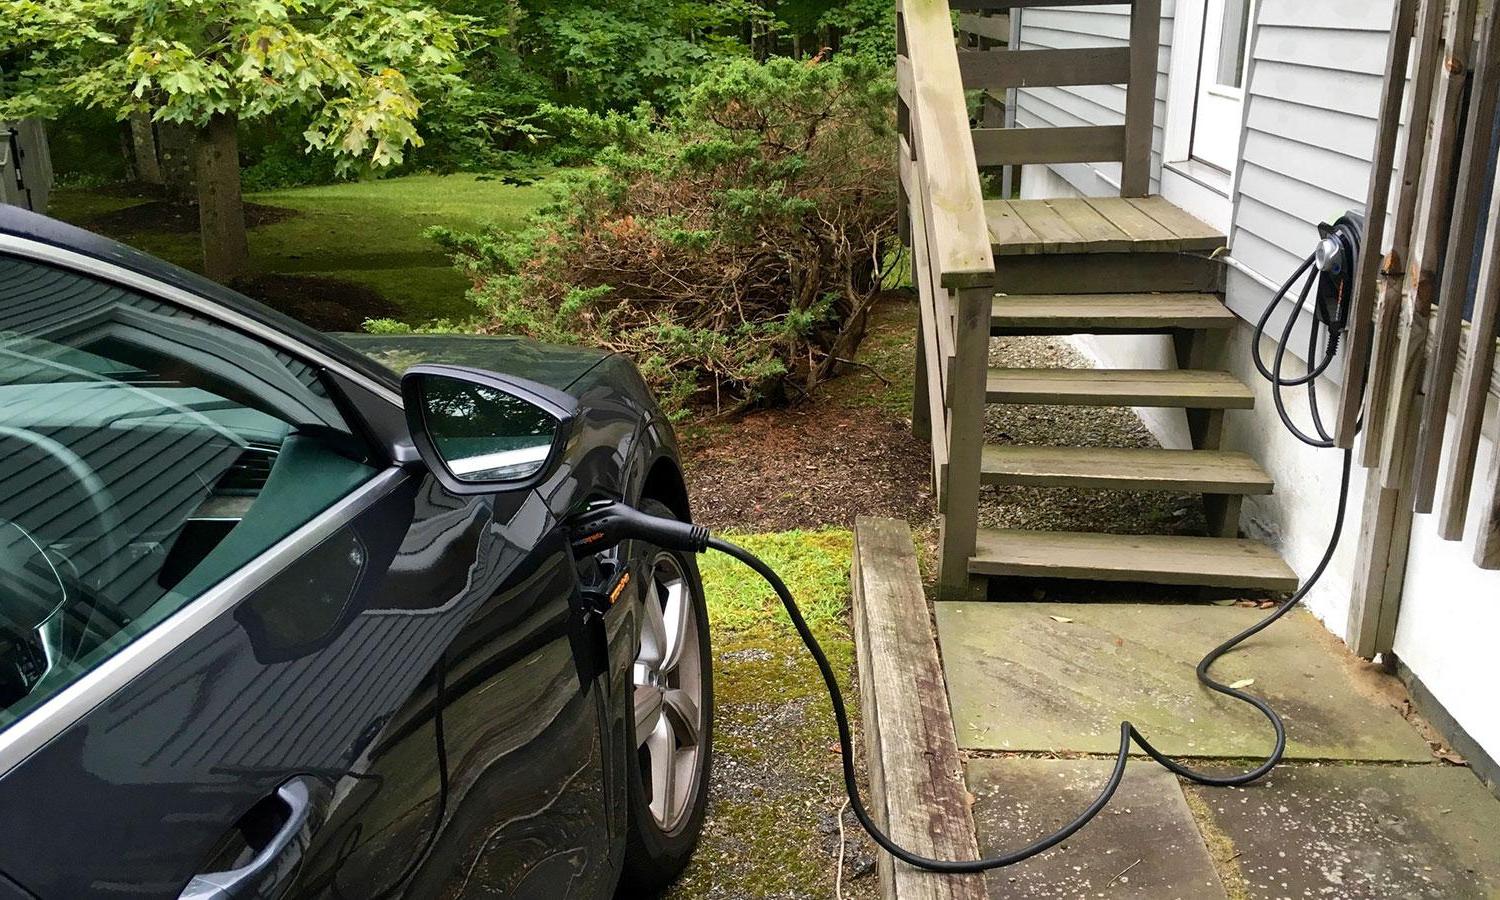 Electric vehicle charging at a home level 2 charger.